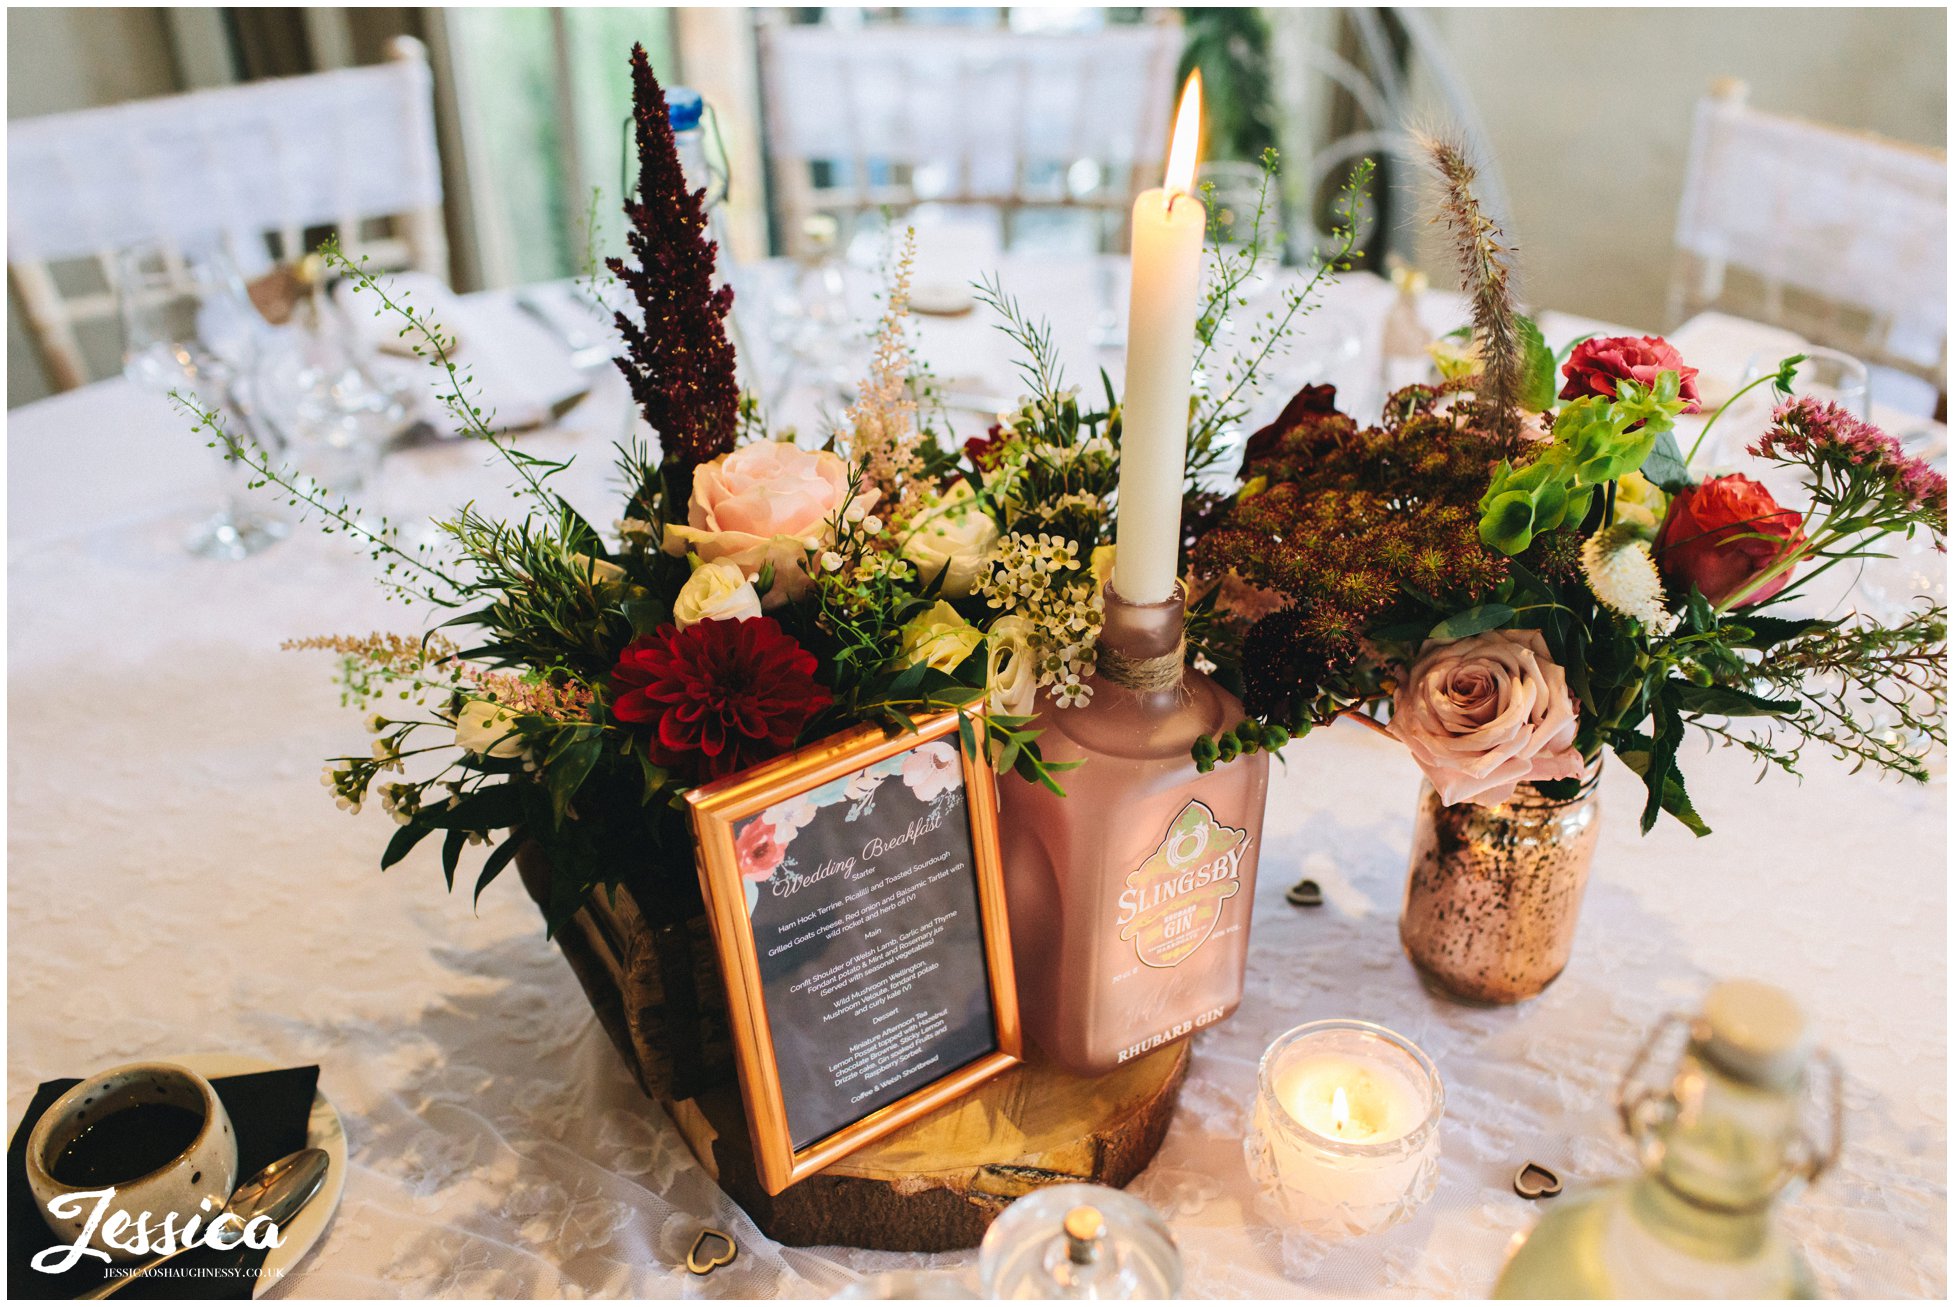 floral displays and gin bottles decorate the tables